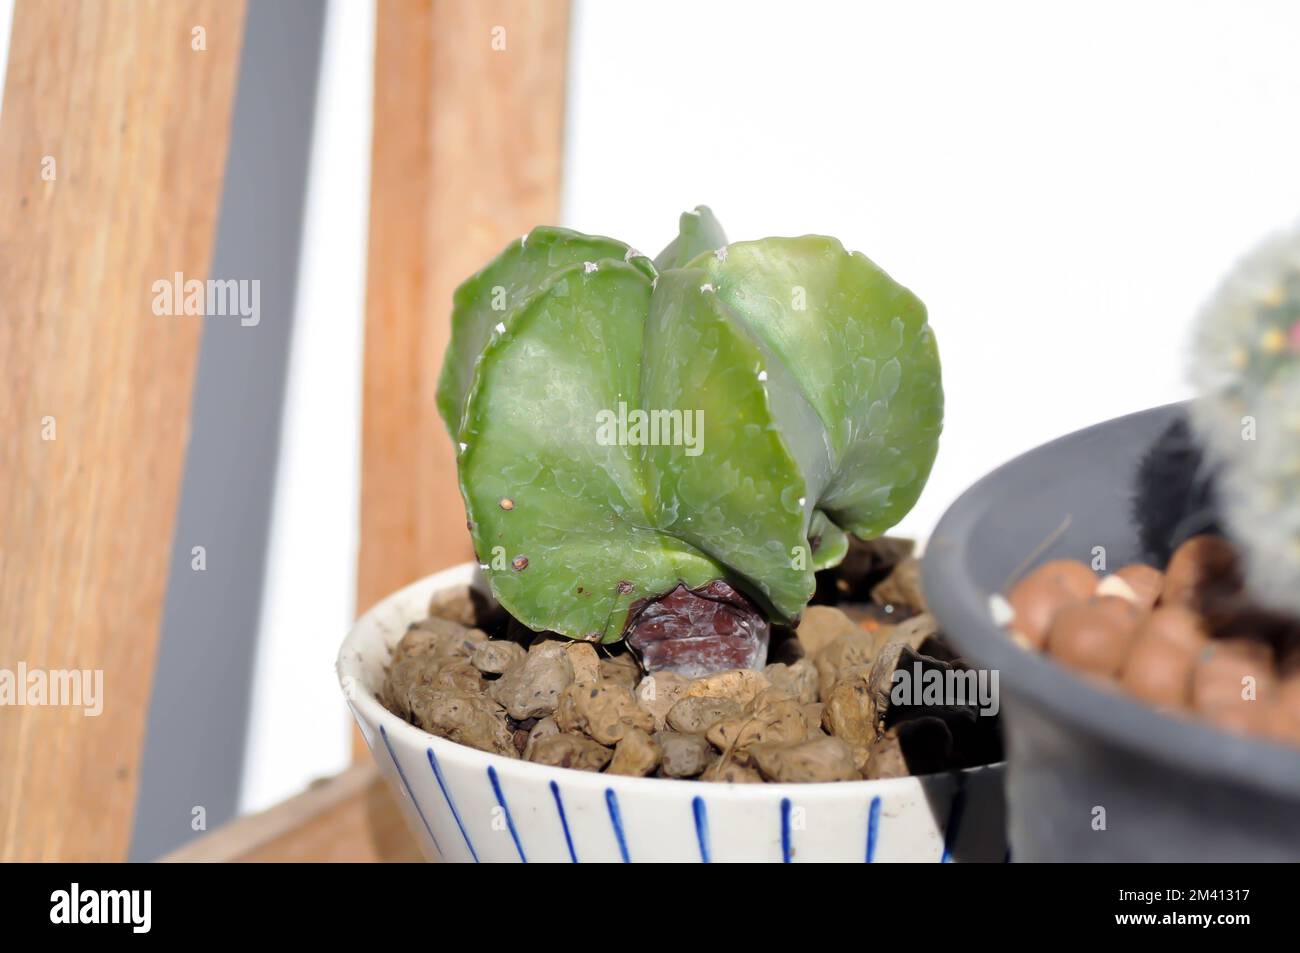 Astrophytum myriostigma, astrophytum myriostigma nudum or astrophytum myriostigma var nudum or cactus or succulent plant Stock Photo